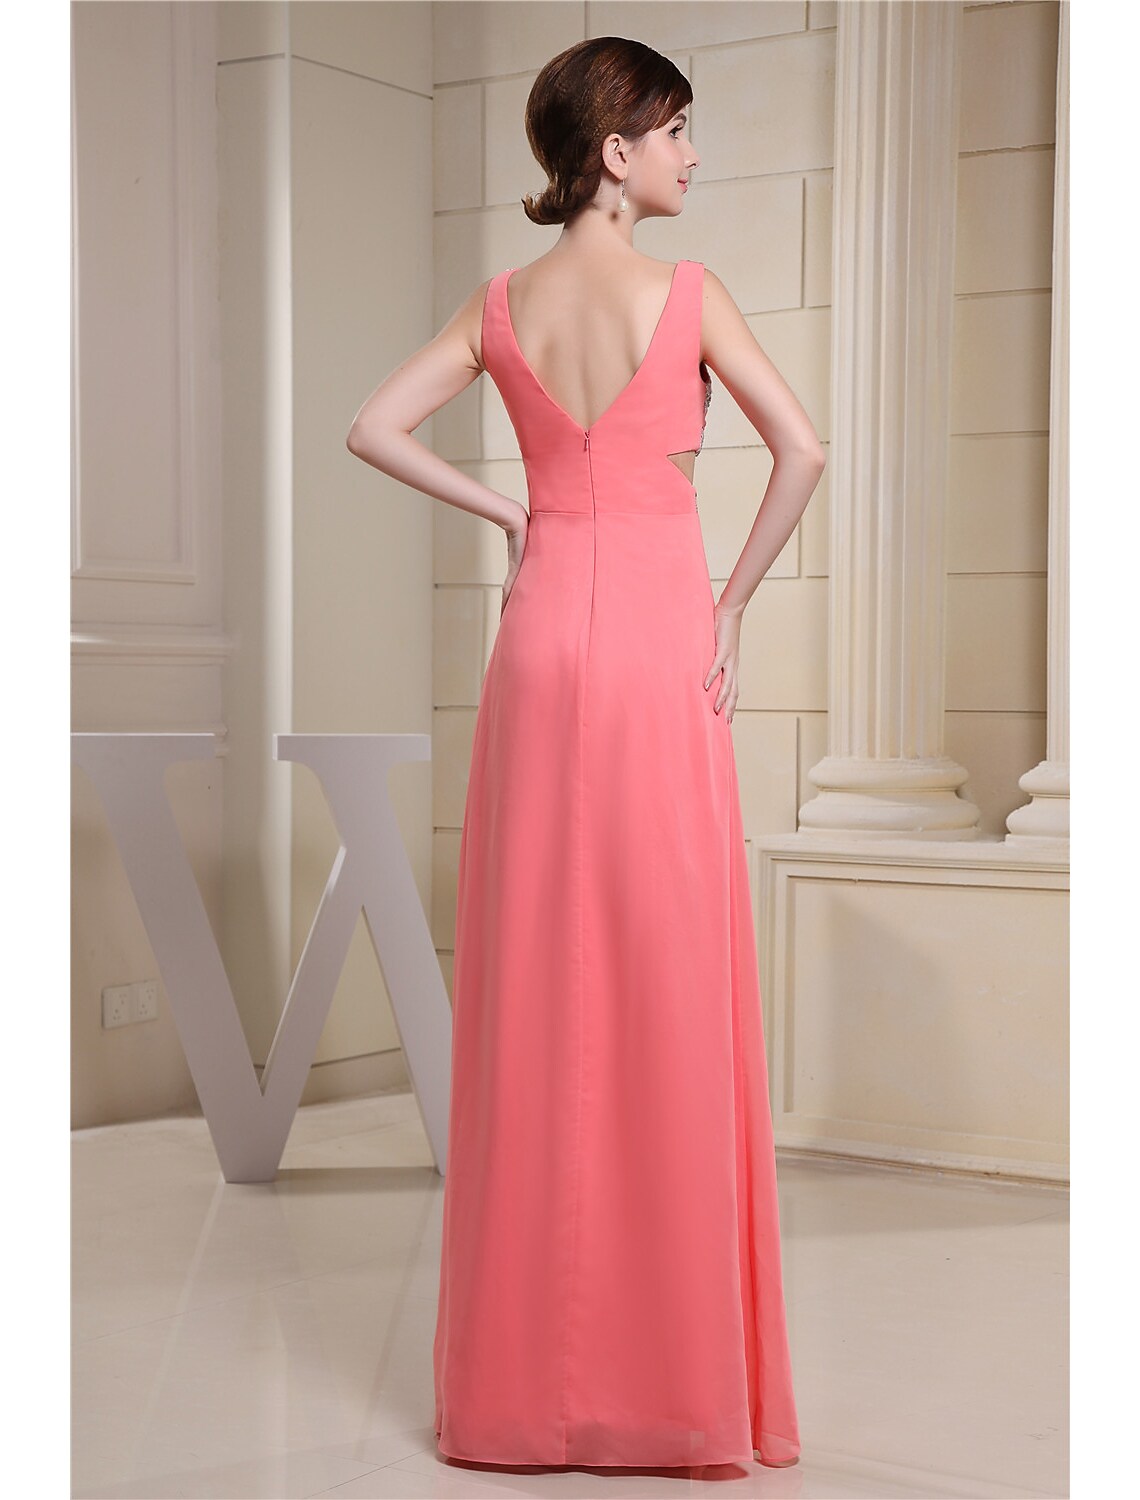 A-Line Evening Gown Sparkle Dress Engagement Floor Length Sleeveless V Neck Chiffon with Pleats Sequin